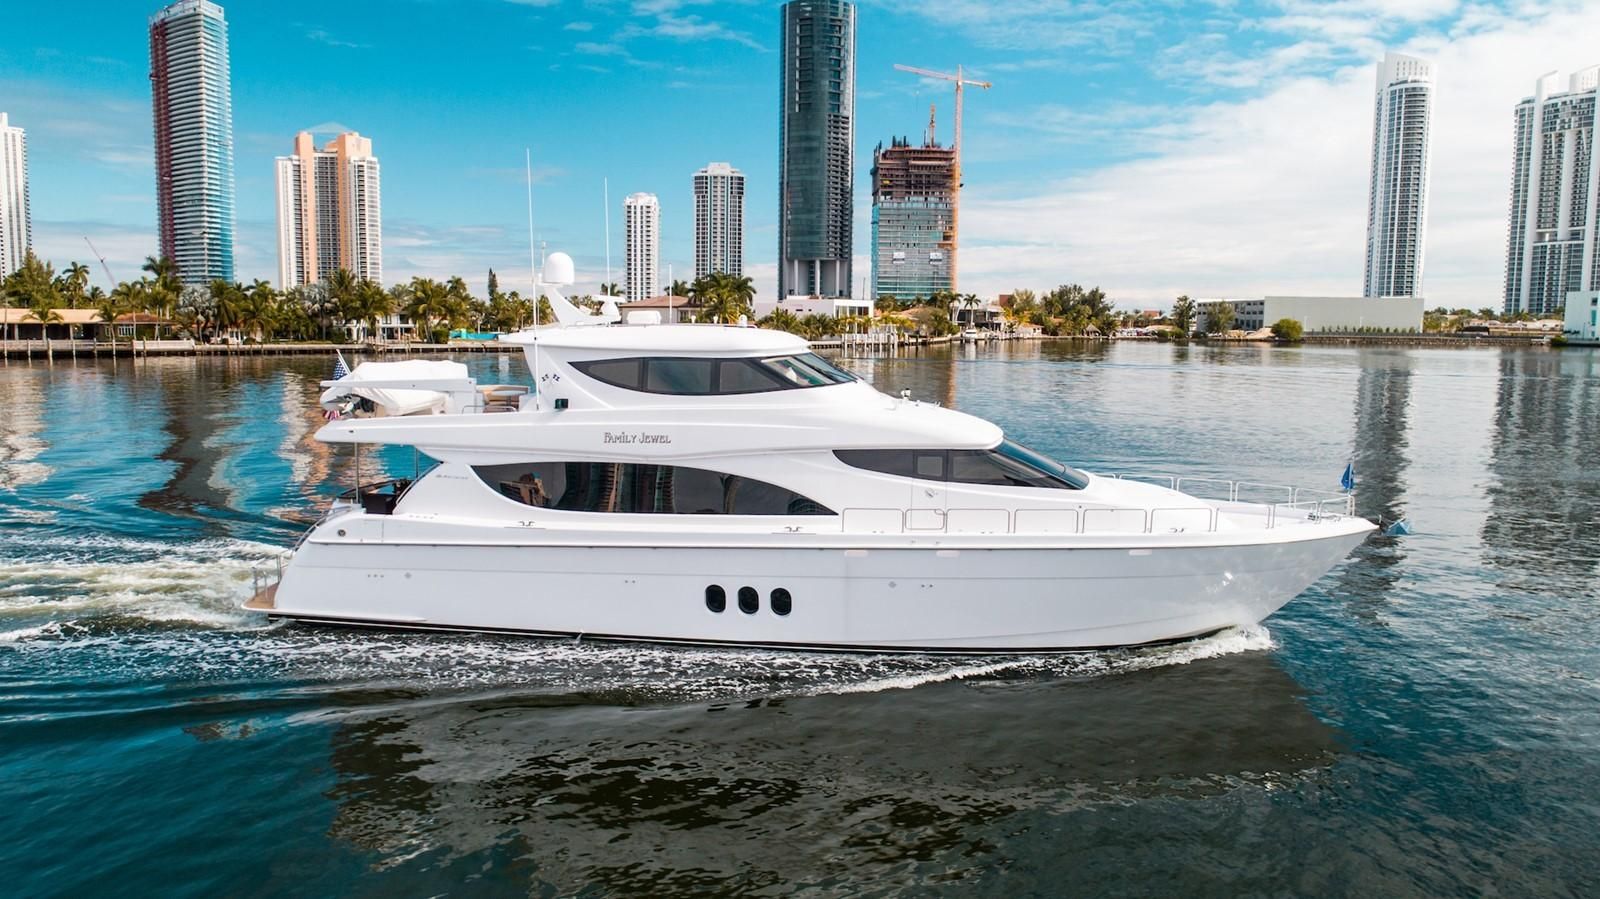 FAMILY JEWEL Motor Yacht Hatteras for sale - YachtWorld